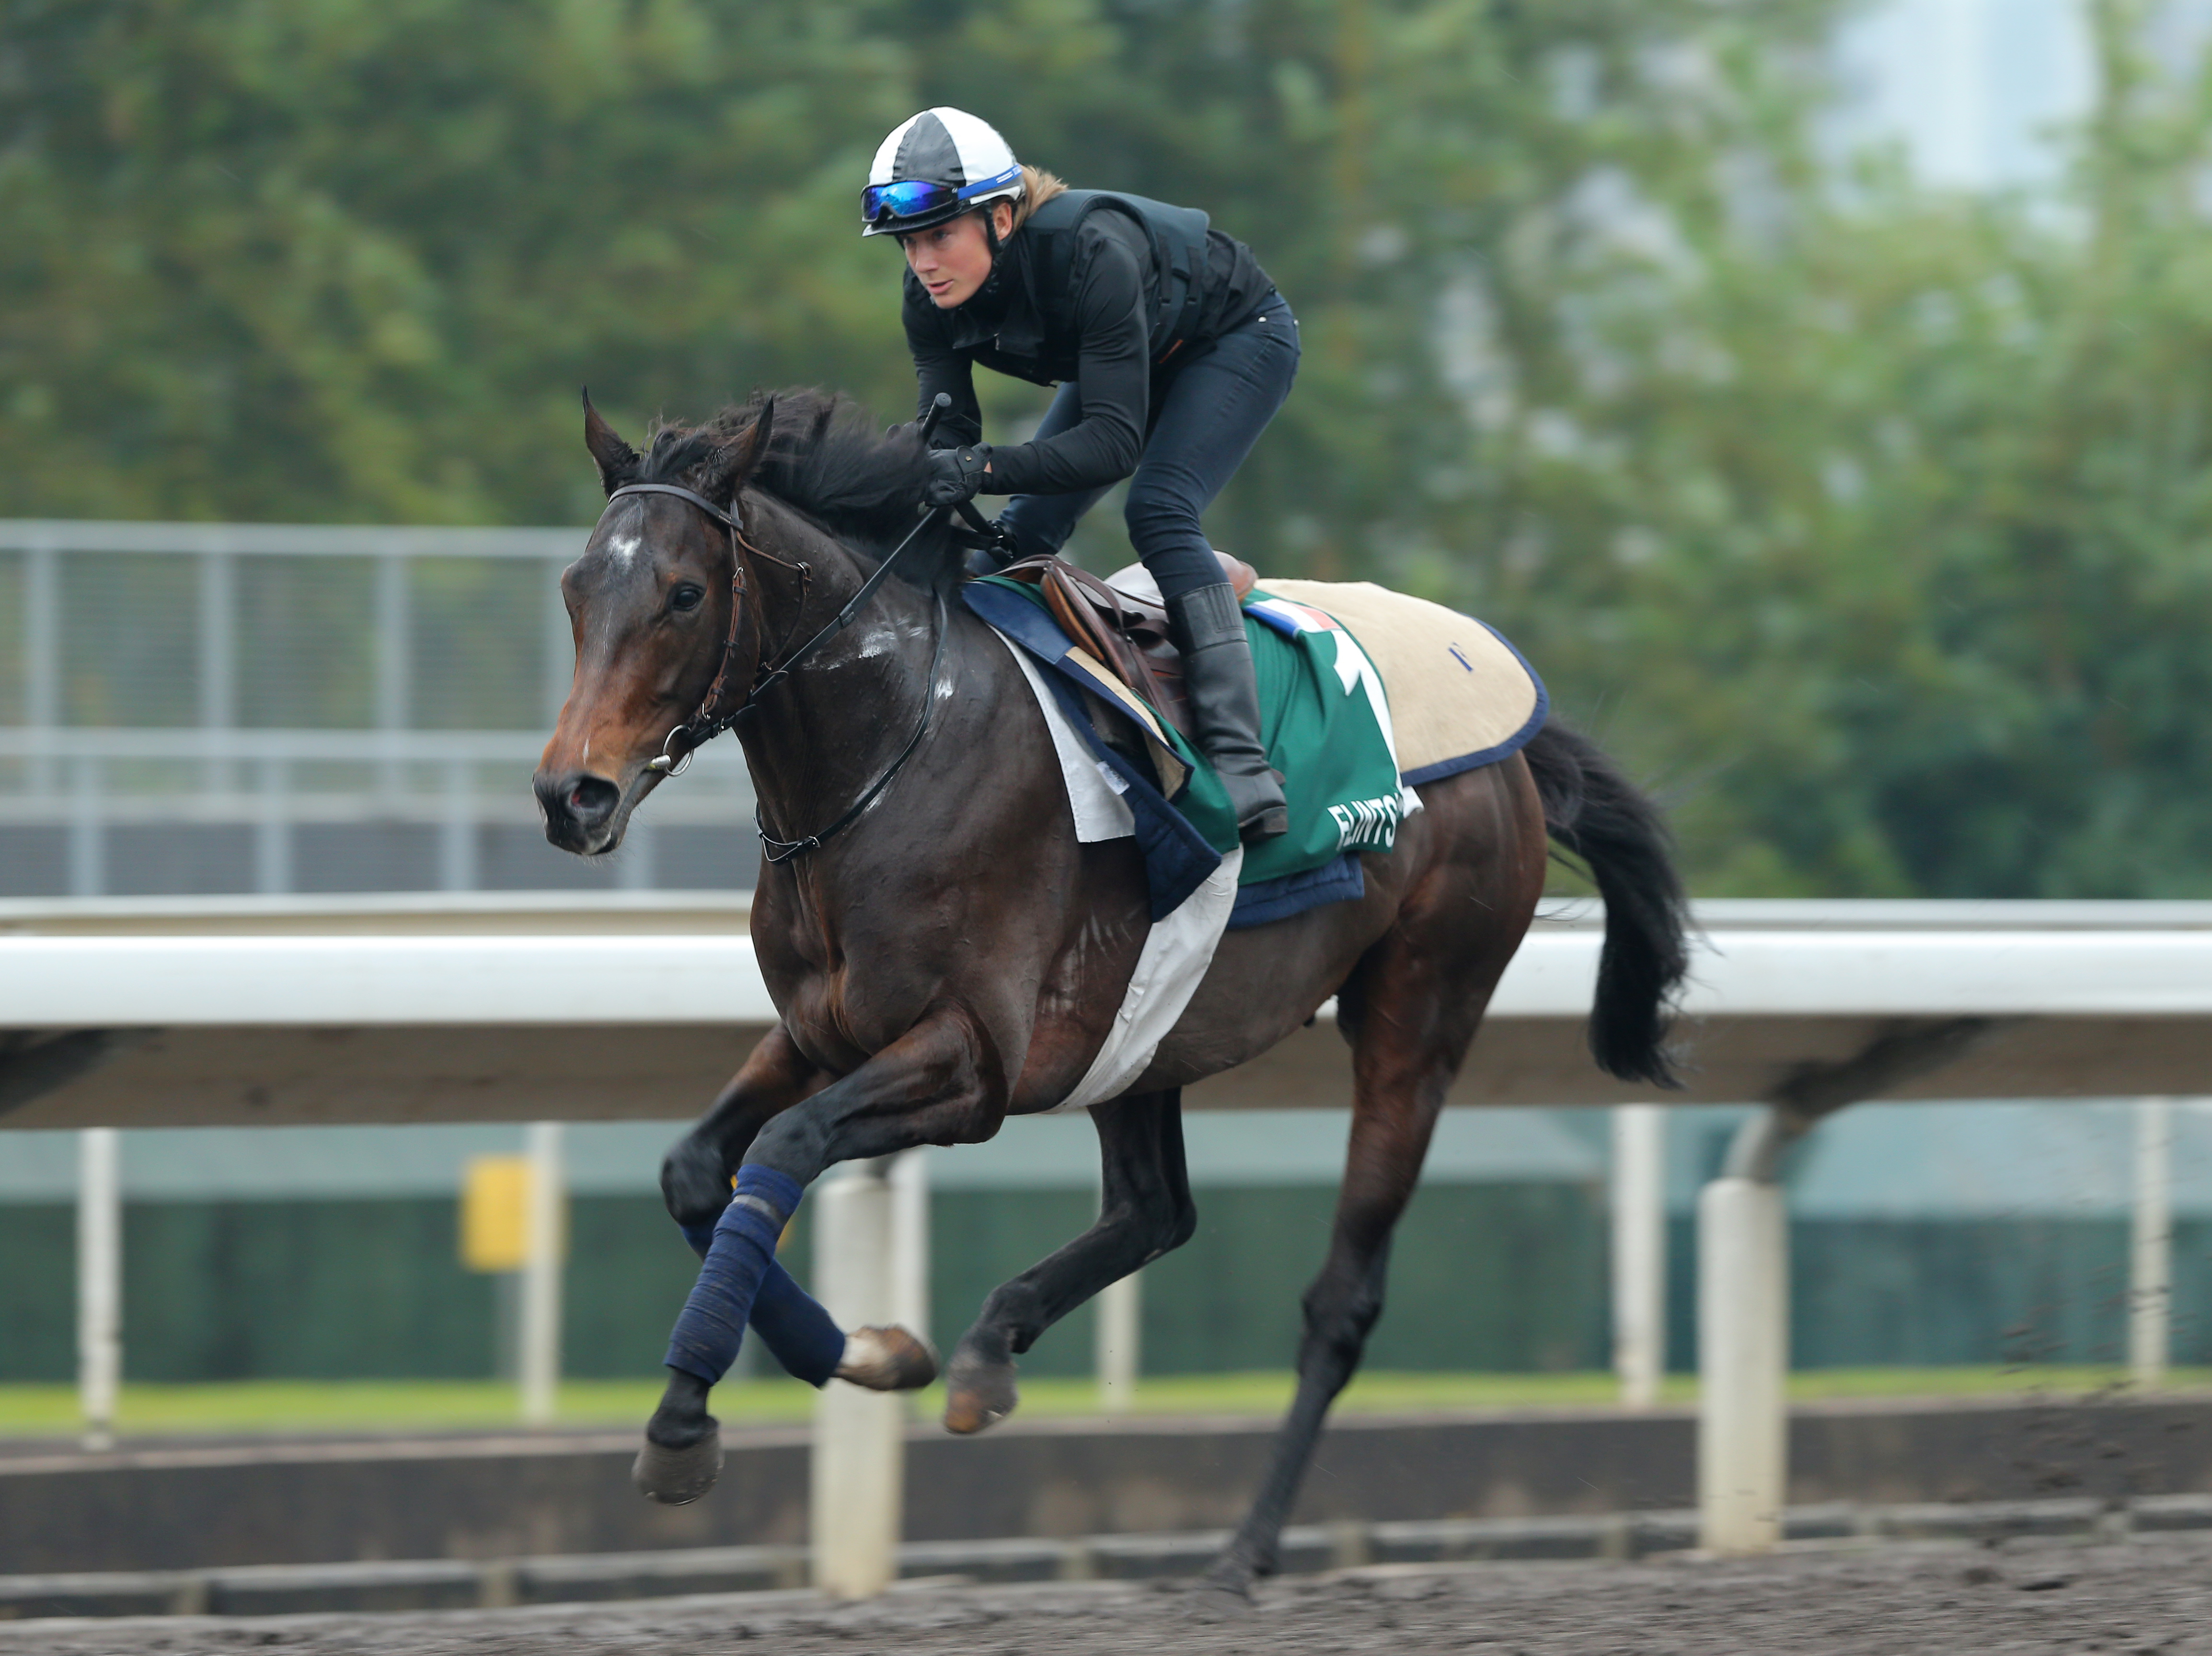 Flintshire brings with him a terrific backstory that has taken him to France, Dubai, the United Kingdom and the United States since his win in last year's Vase. Photo: Kenneth Chan